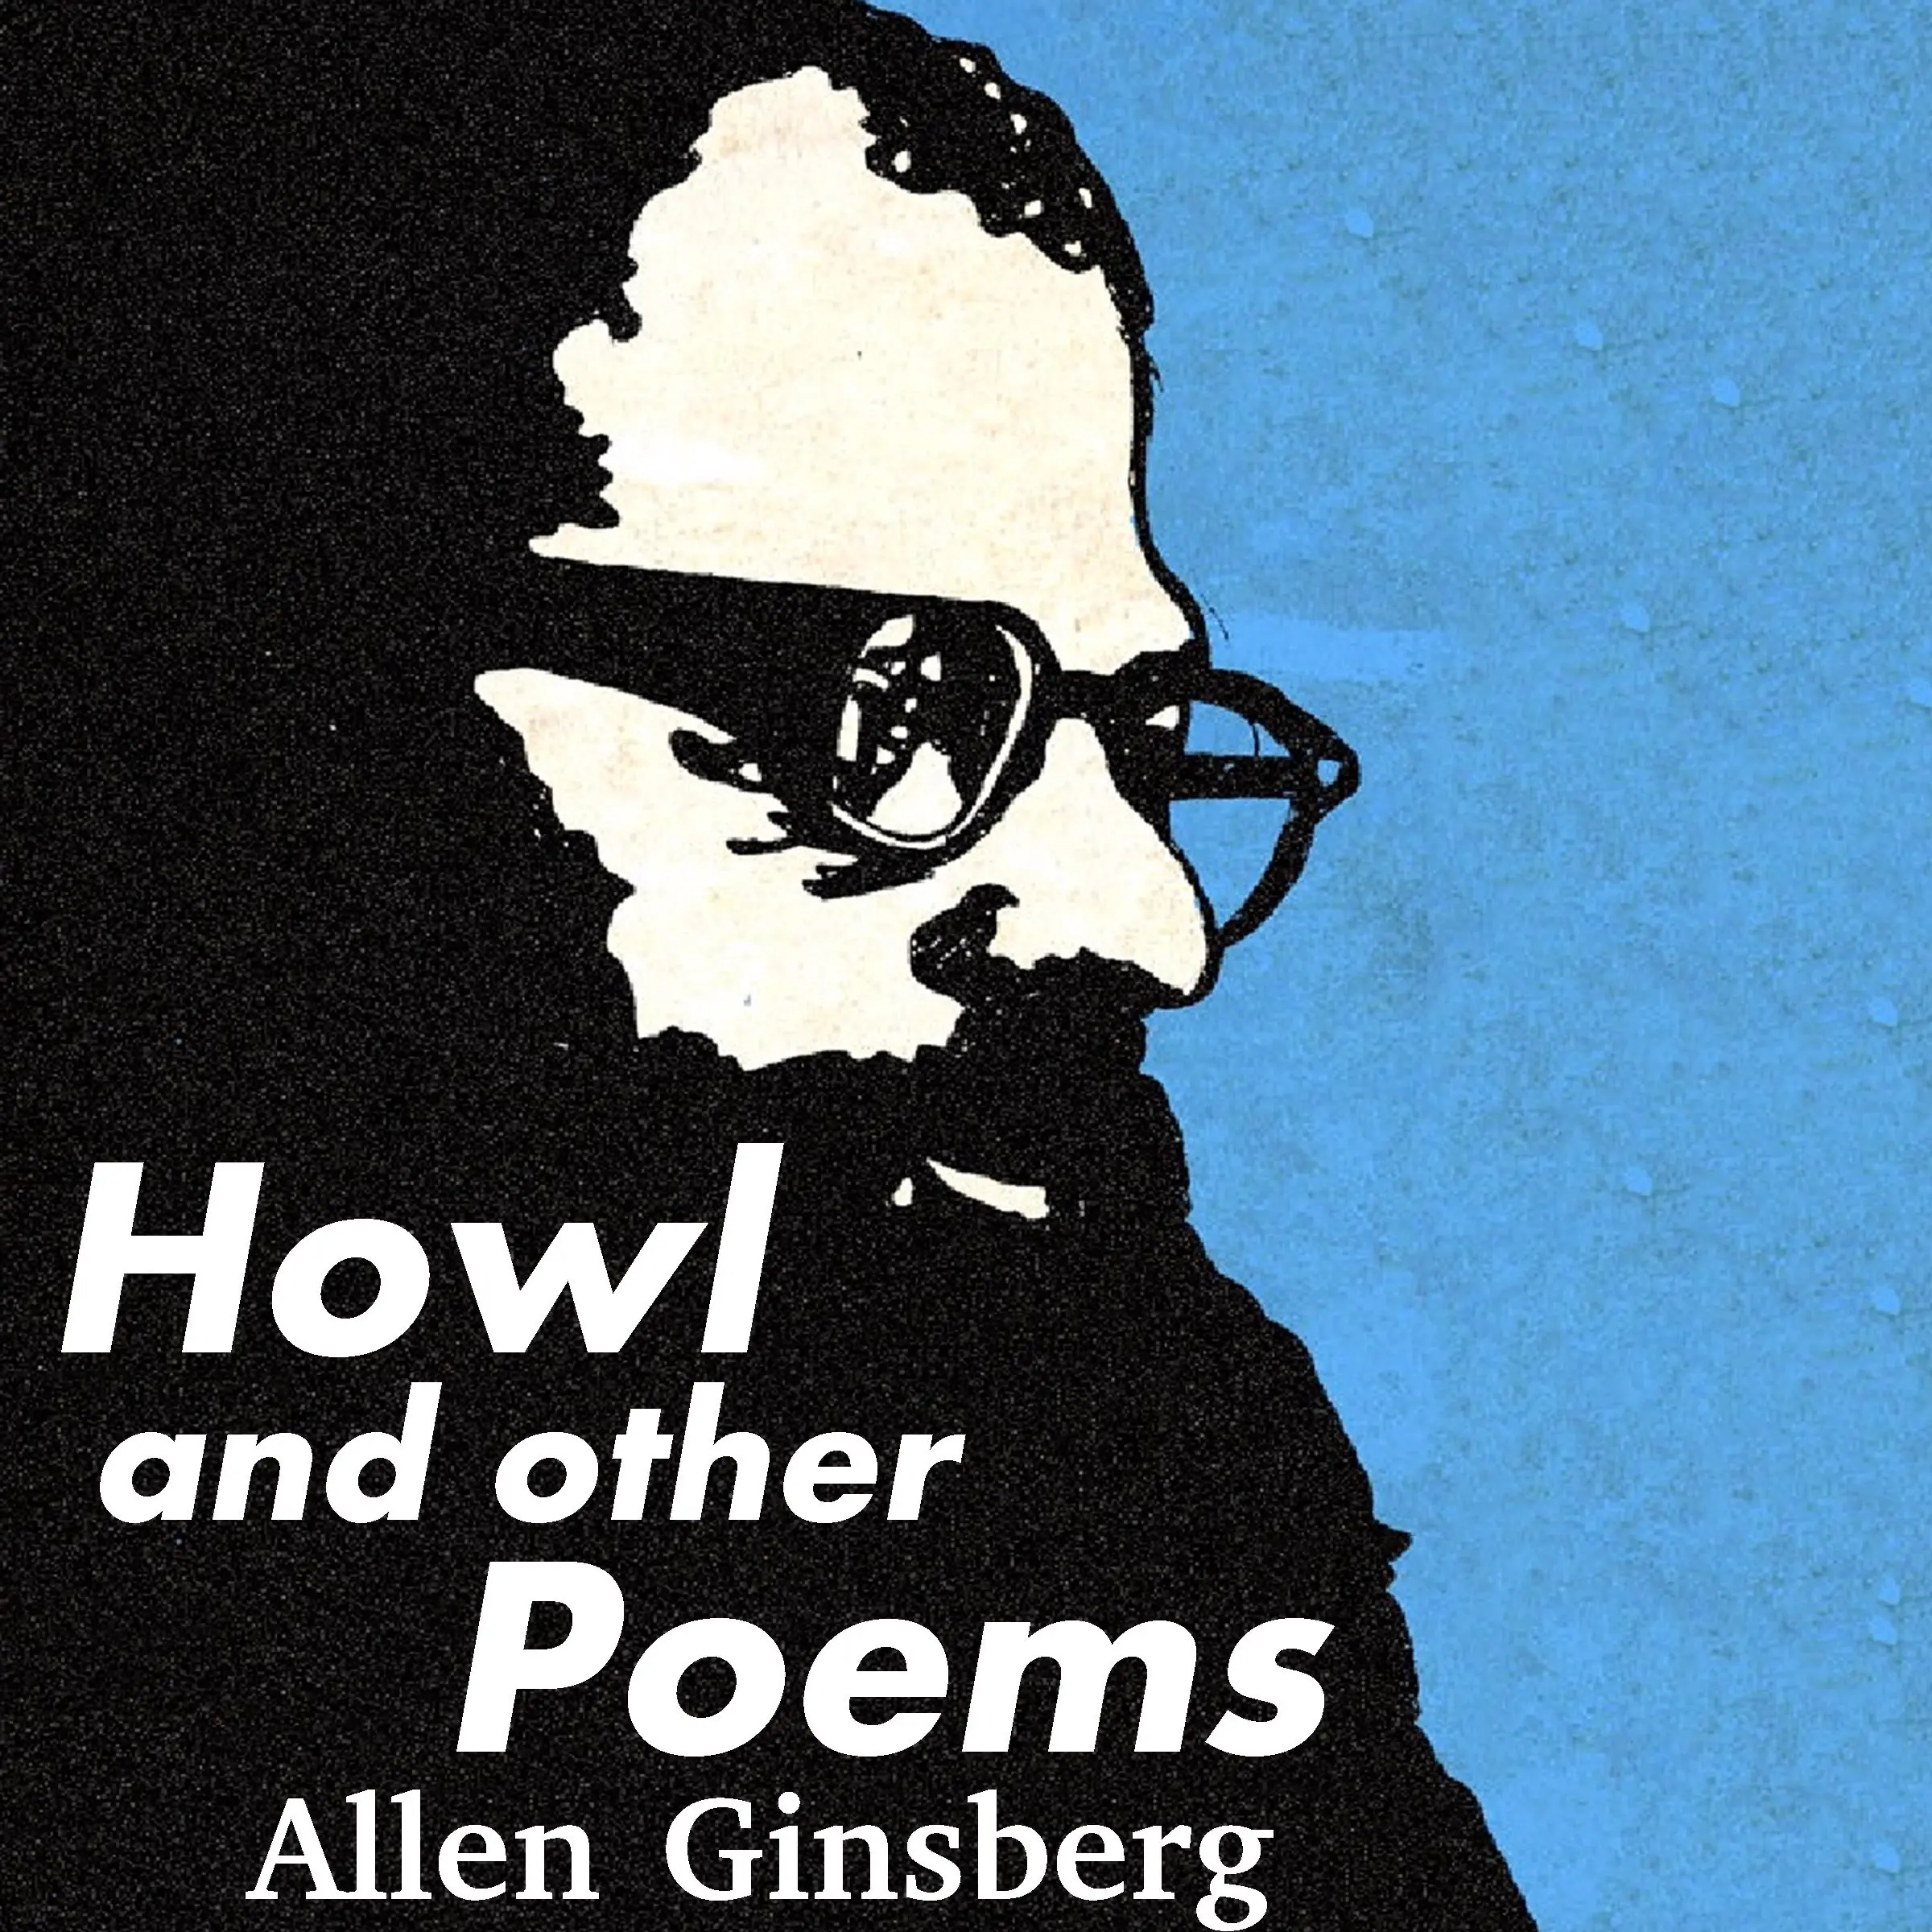 Howl and Other Poems Audiobook by Allen Ginsberg